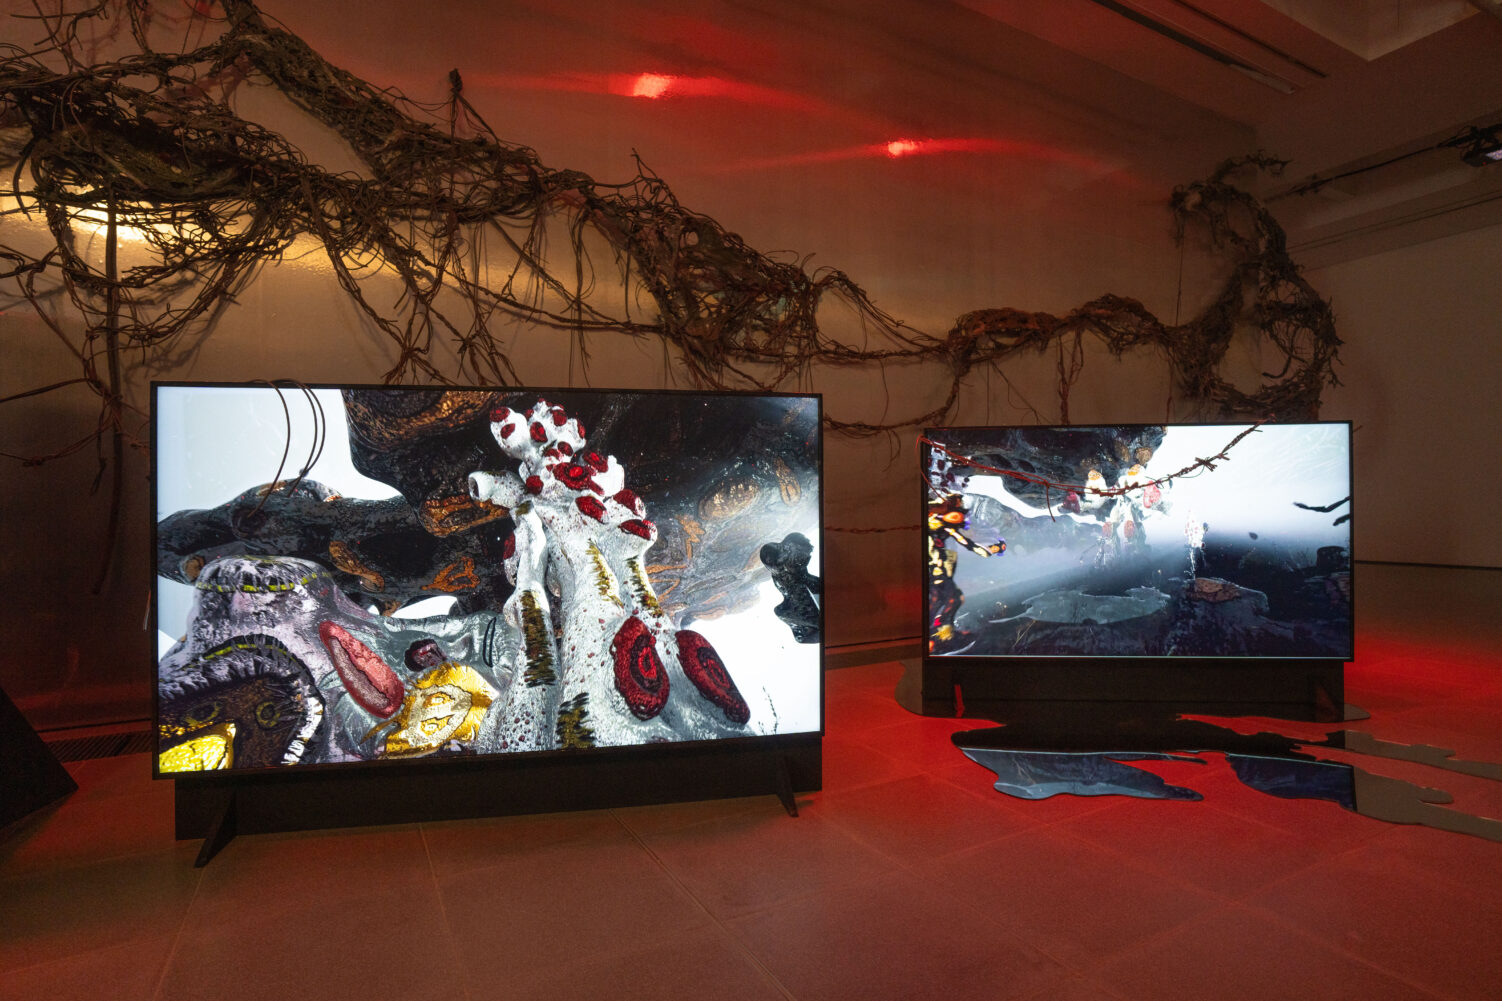 A pair of screens display fantastic landscapes. They are placed in a gallery where a vine-like sculpture hangs from the wall